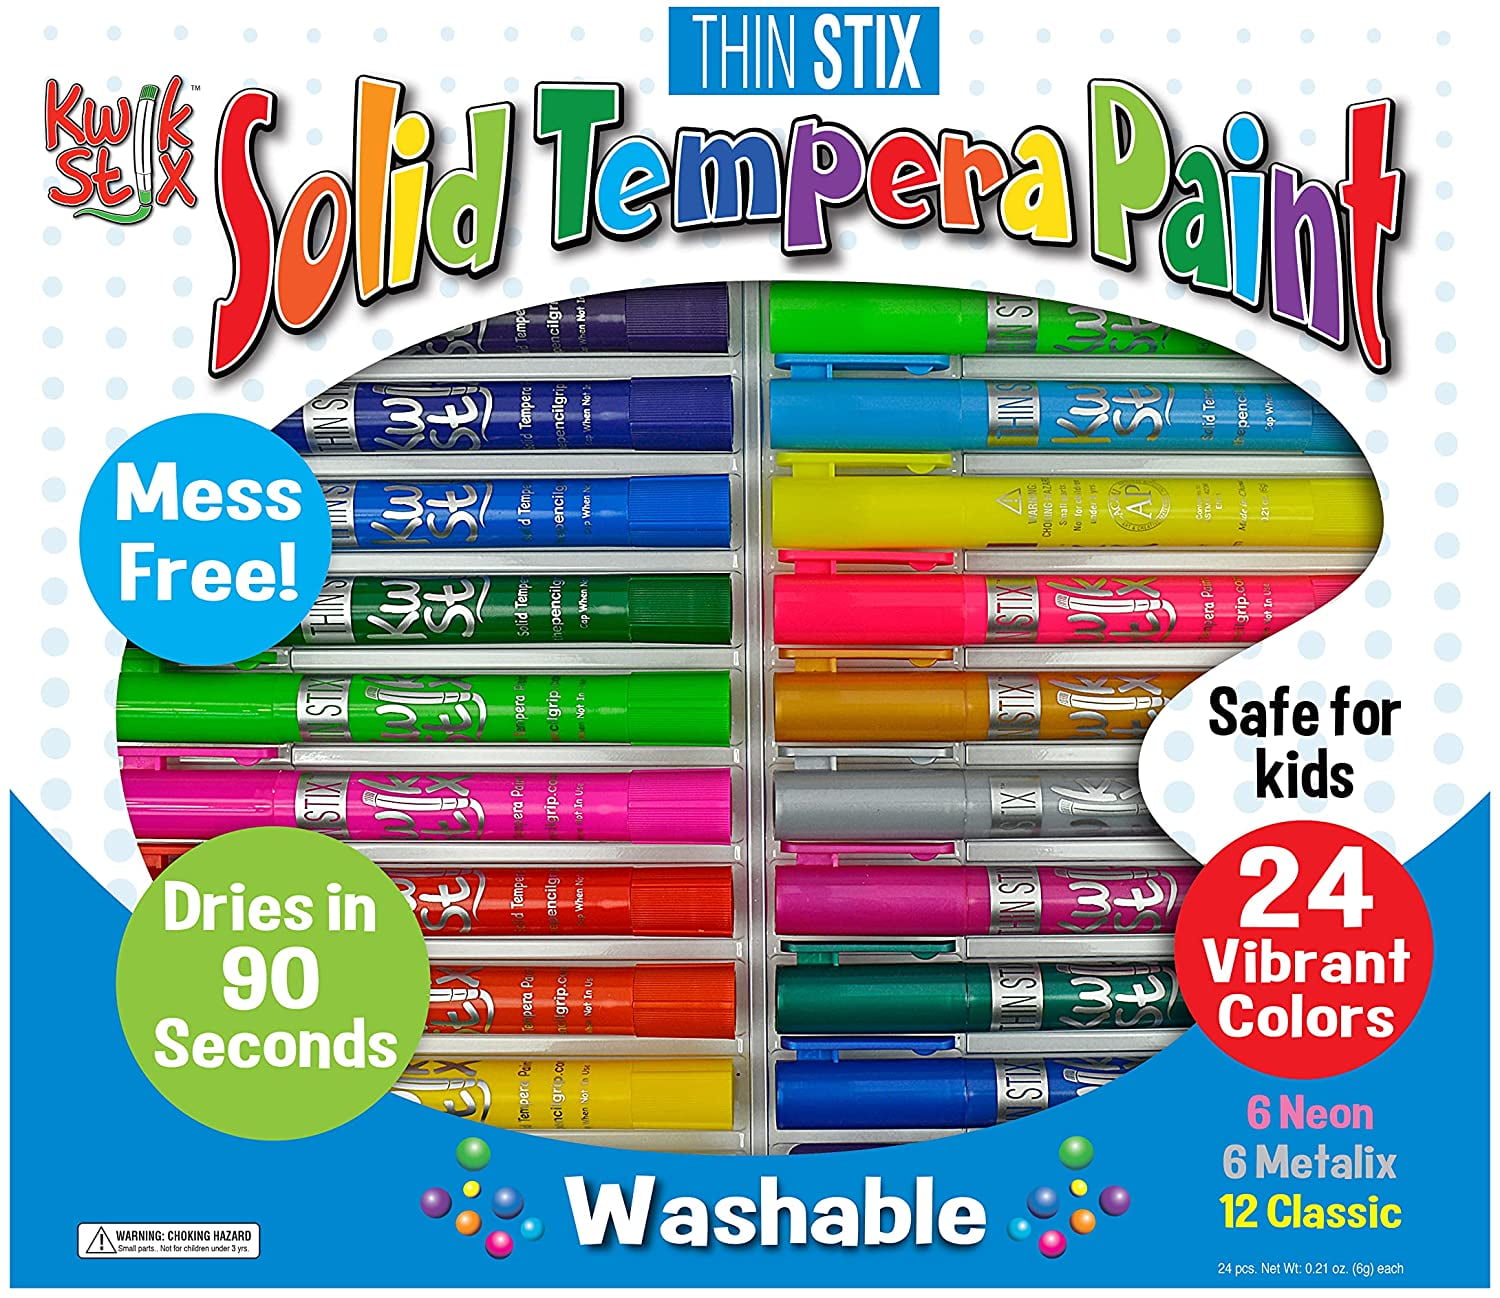 The Pencil Grip Kwik Stix Solid Tempera Paint TPG Super Quick Drying 12 Pack 